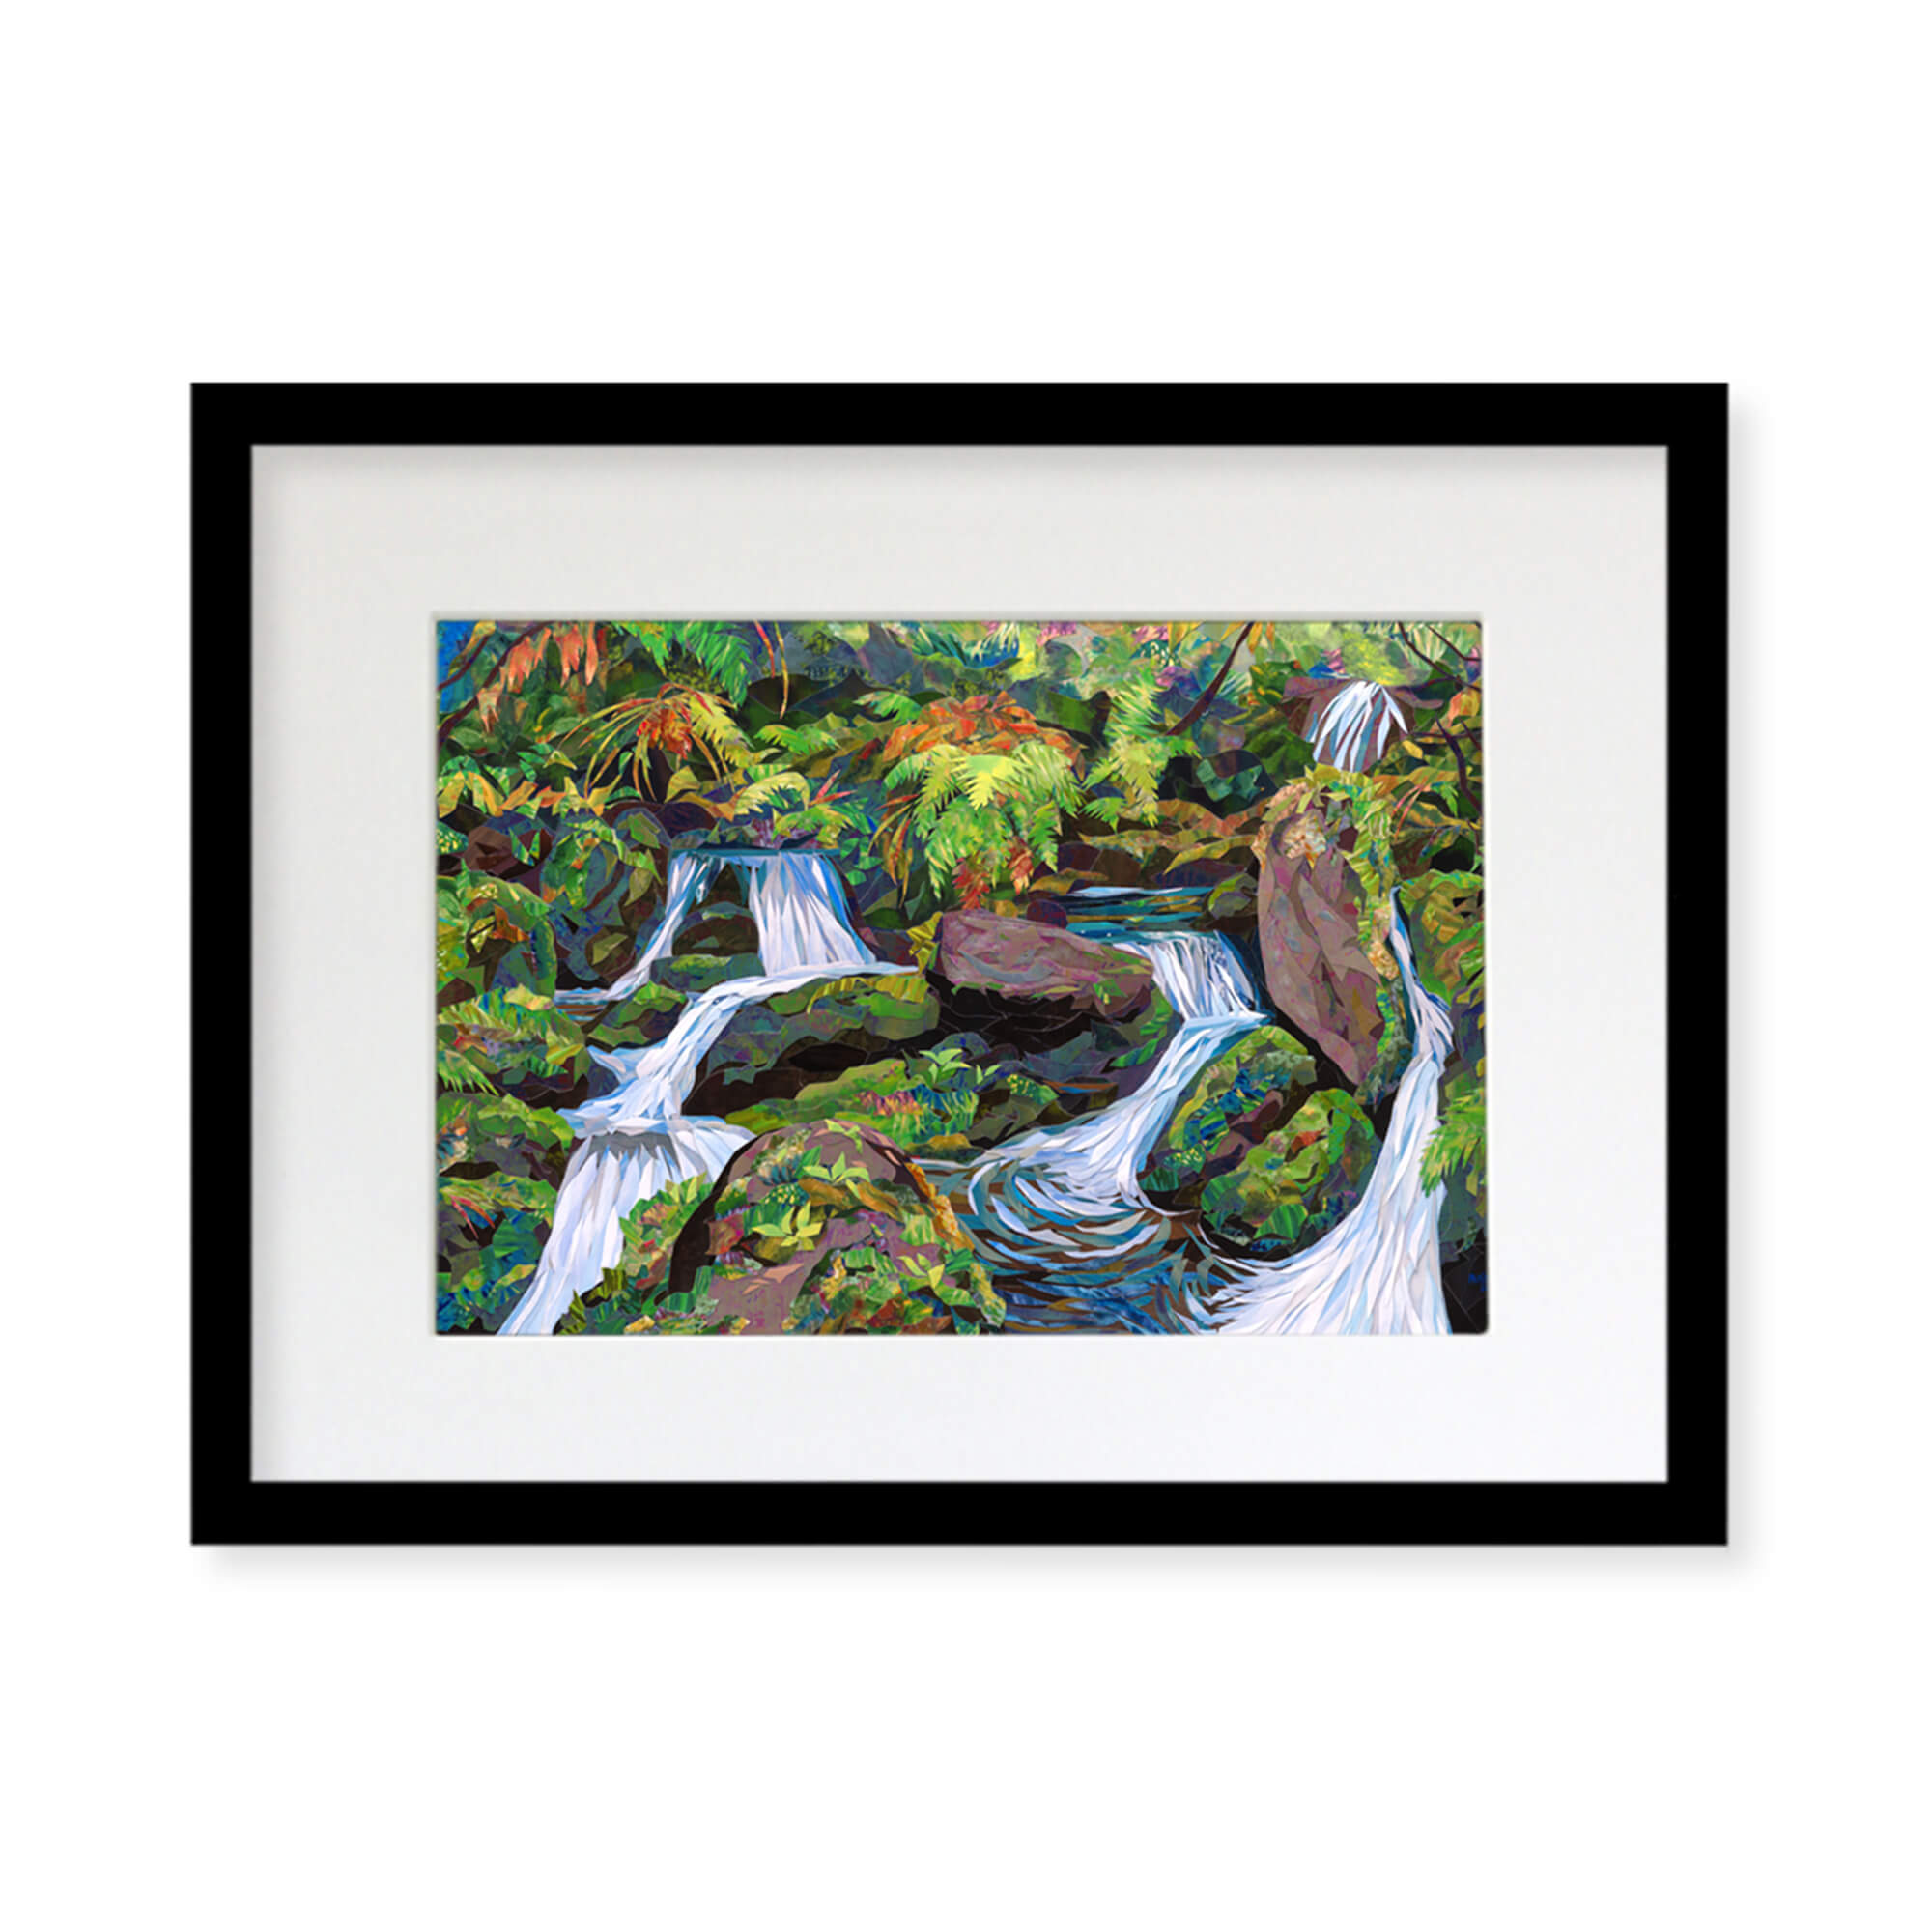 A framed matted art print featuring a collage of colorful streams of water surrounded by tropical plants by Hawaii artist Patrick Parker